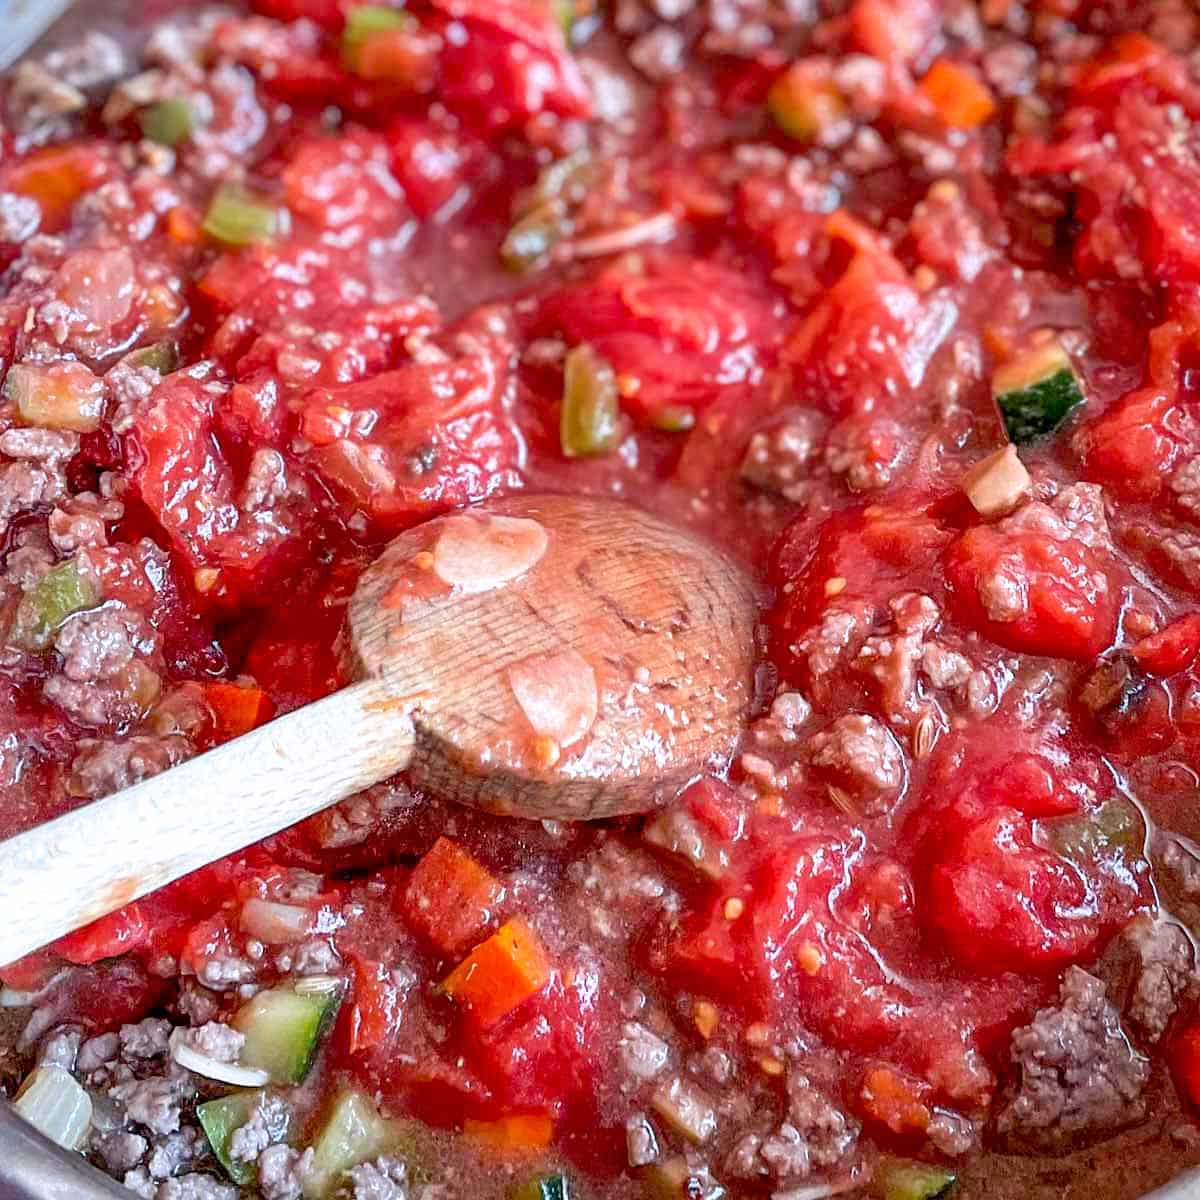 Crushed whole peeled tomatoes are added to the browned meat and vegetables.